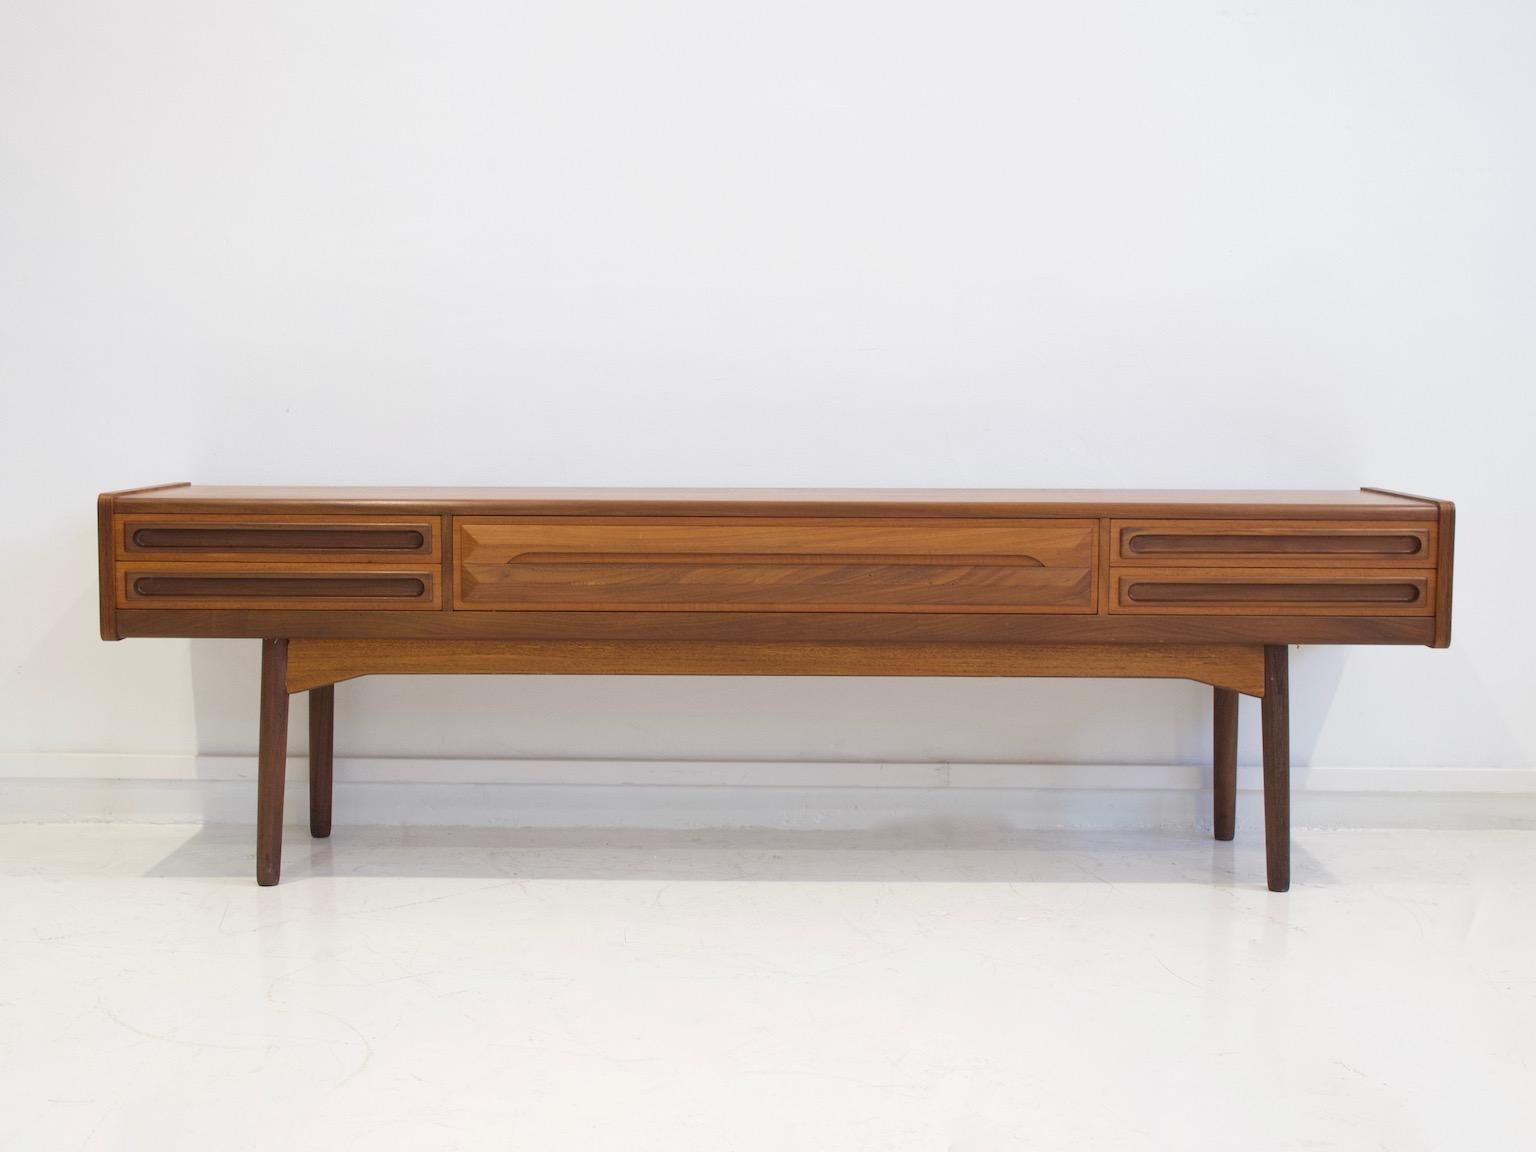 Low sideboard veneered with teak wood, front with five drawers, frame with round inclined tapered legs. Manufactured in Denmark in circa 1960. Side drawers lined with green felt and have compartments for tableware.